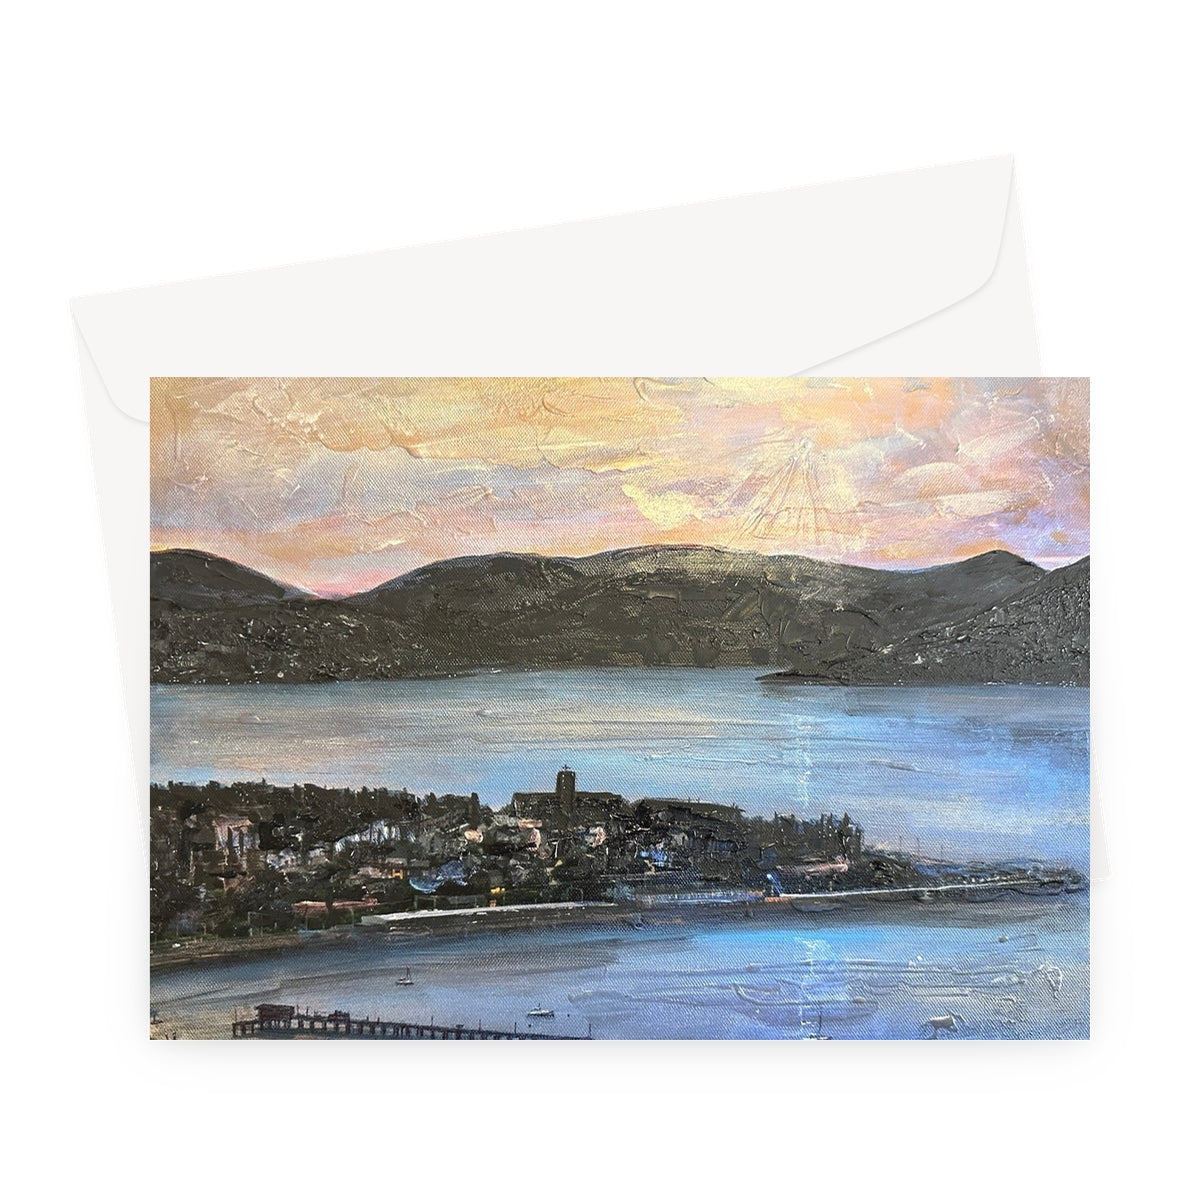 From Lyle Hill Art Gifts Greeting Card-Greetings Cards-River Clyde Art Gallery-A5 Landscape-1 Card-Paintings, Prints, Homeware, Art Gifts From Scotland By Scottish Artist Kevin Hunter